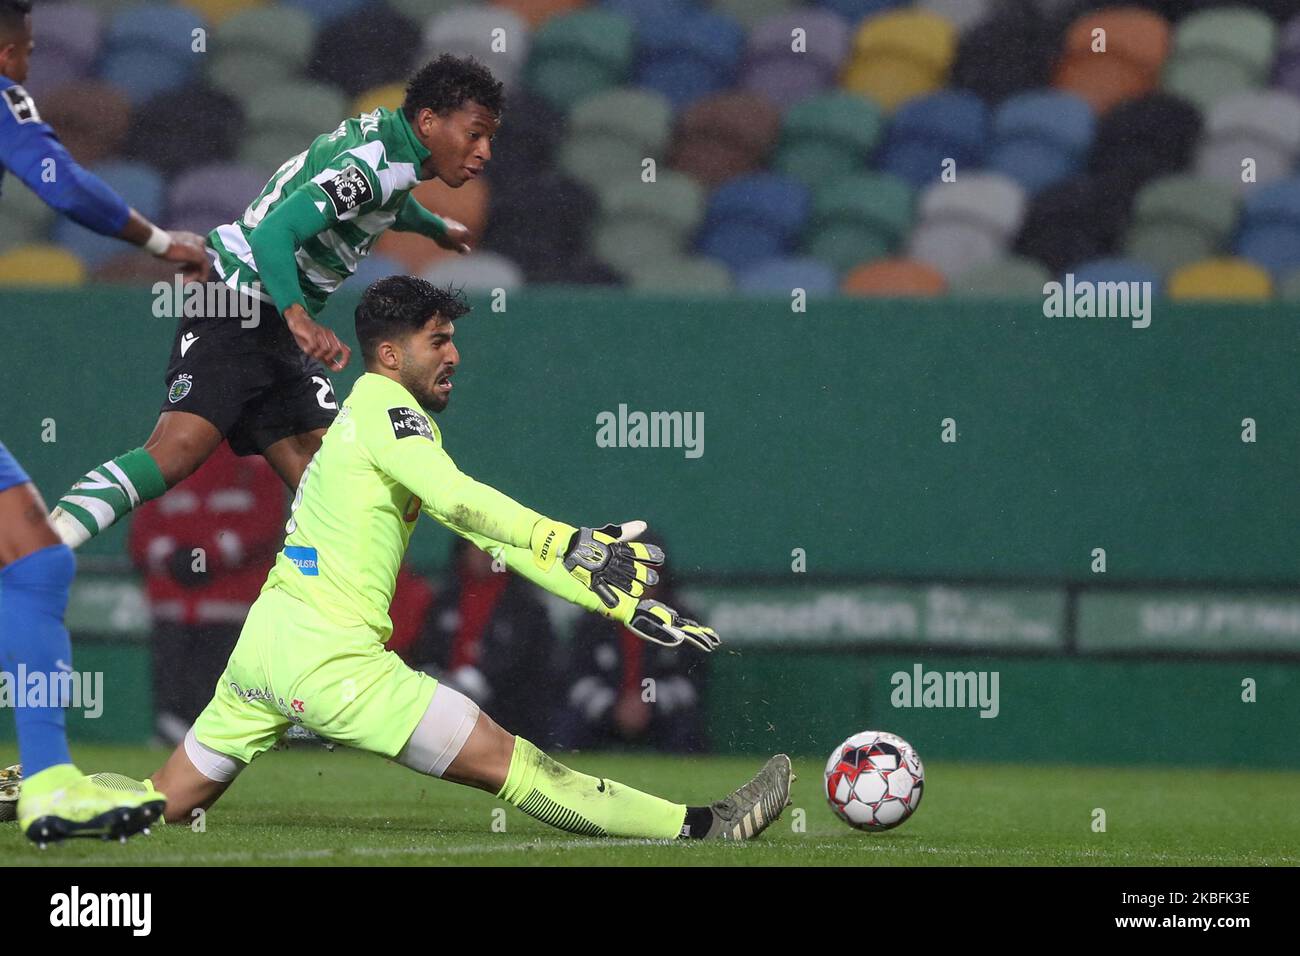 Gonzalo Plata of Sporting CP (L) vies with Amir Abedzadeh of CS Maritimo during the Portuguese League football match between Sporting CP and CS Maritimo at Jose Alvalade stadium in Lisbon, Portugal on January 27, 2020. (Photo by Pedro FiÃºza/NurPhoto) Stock Photo